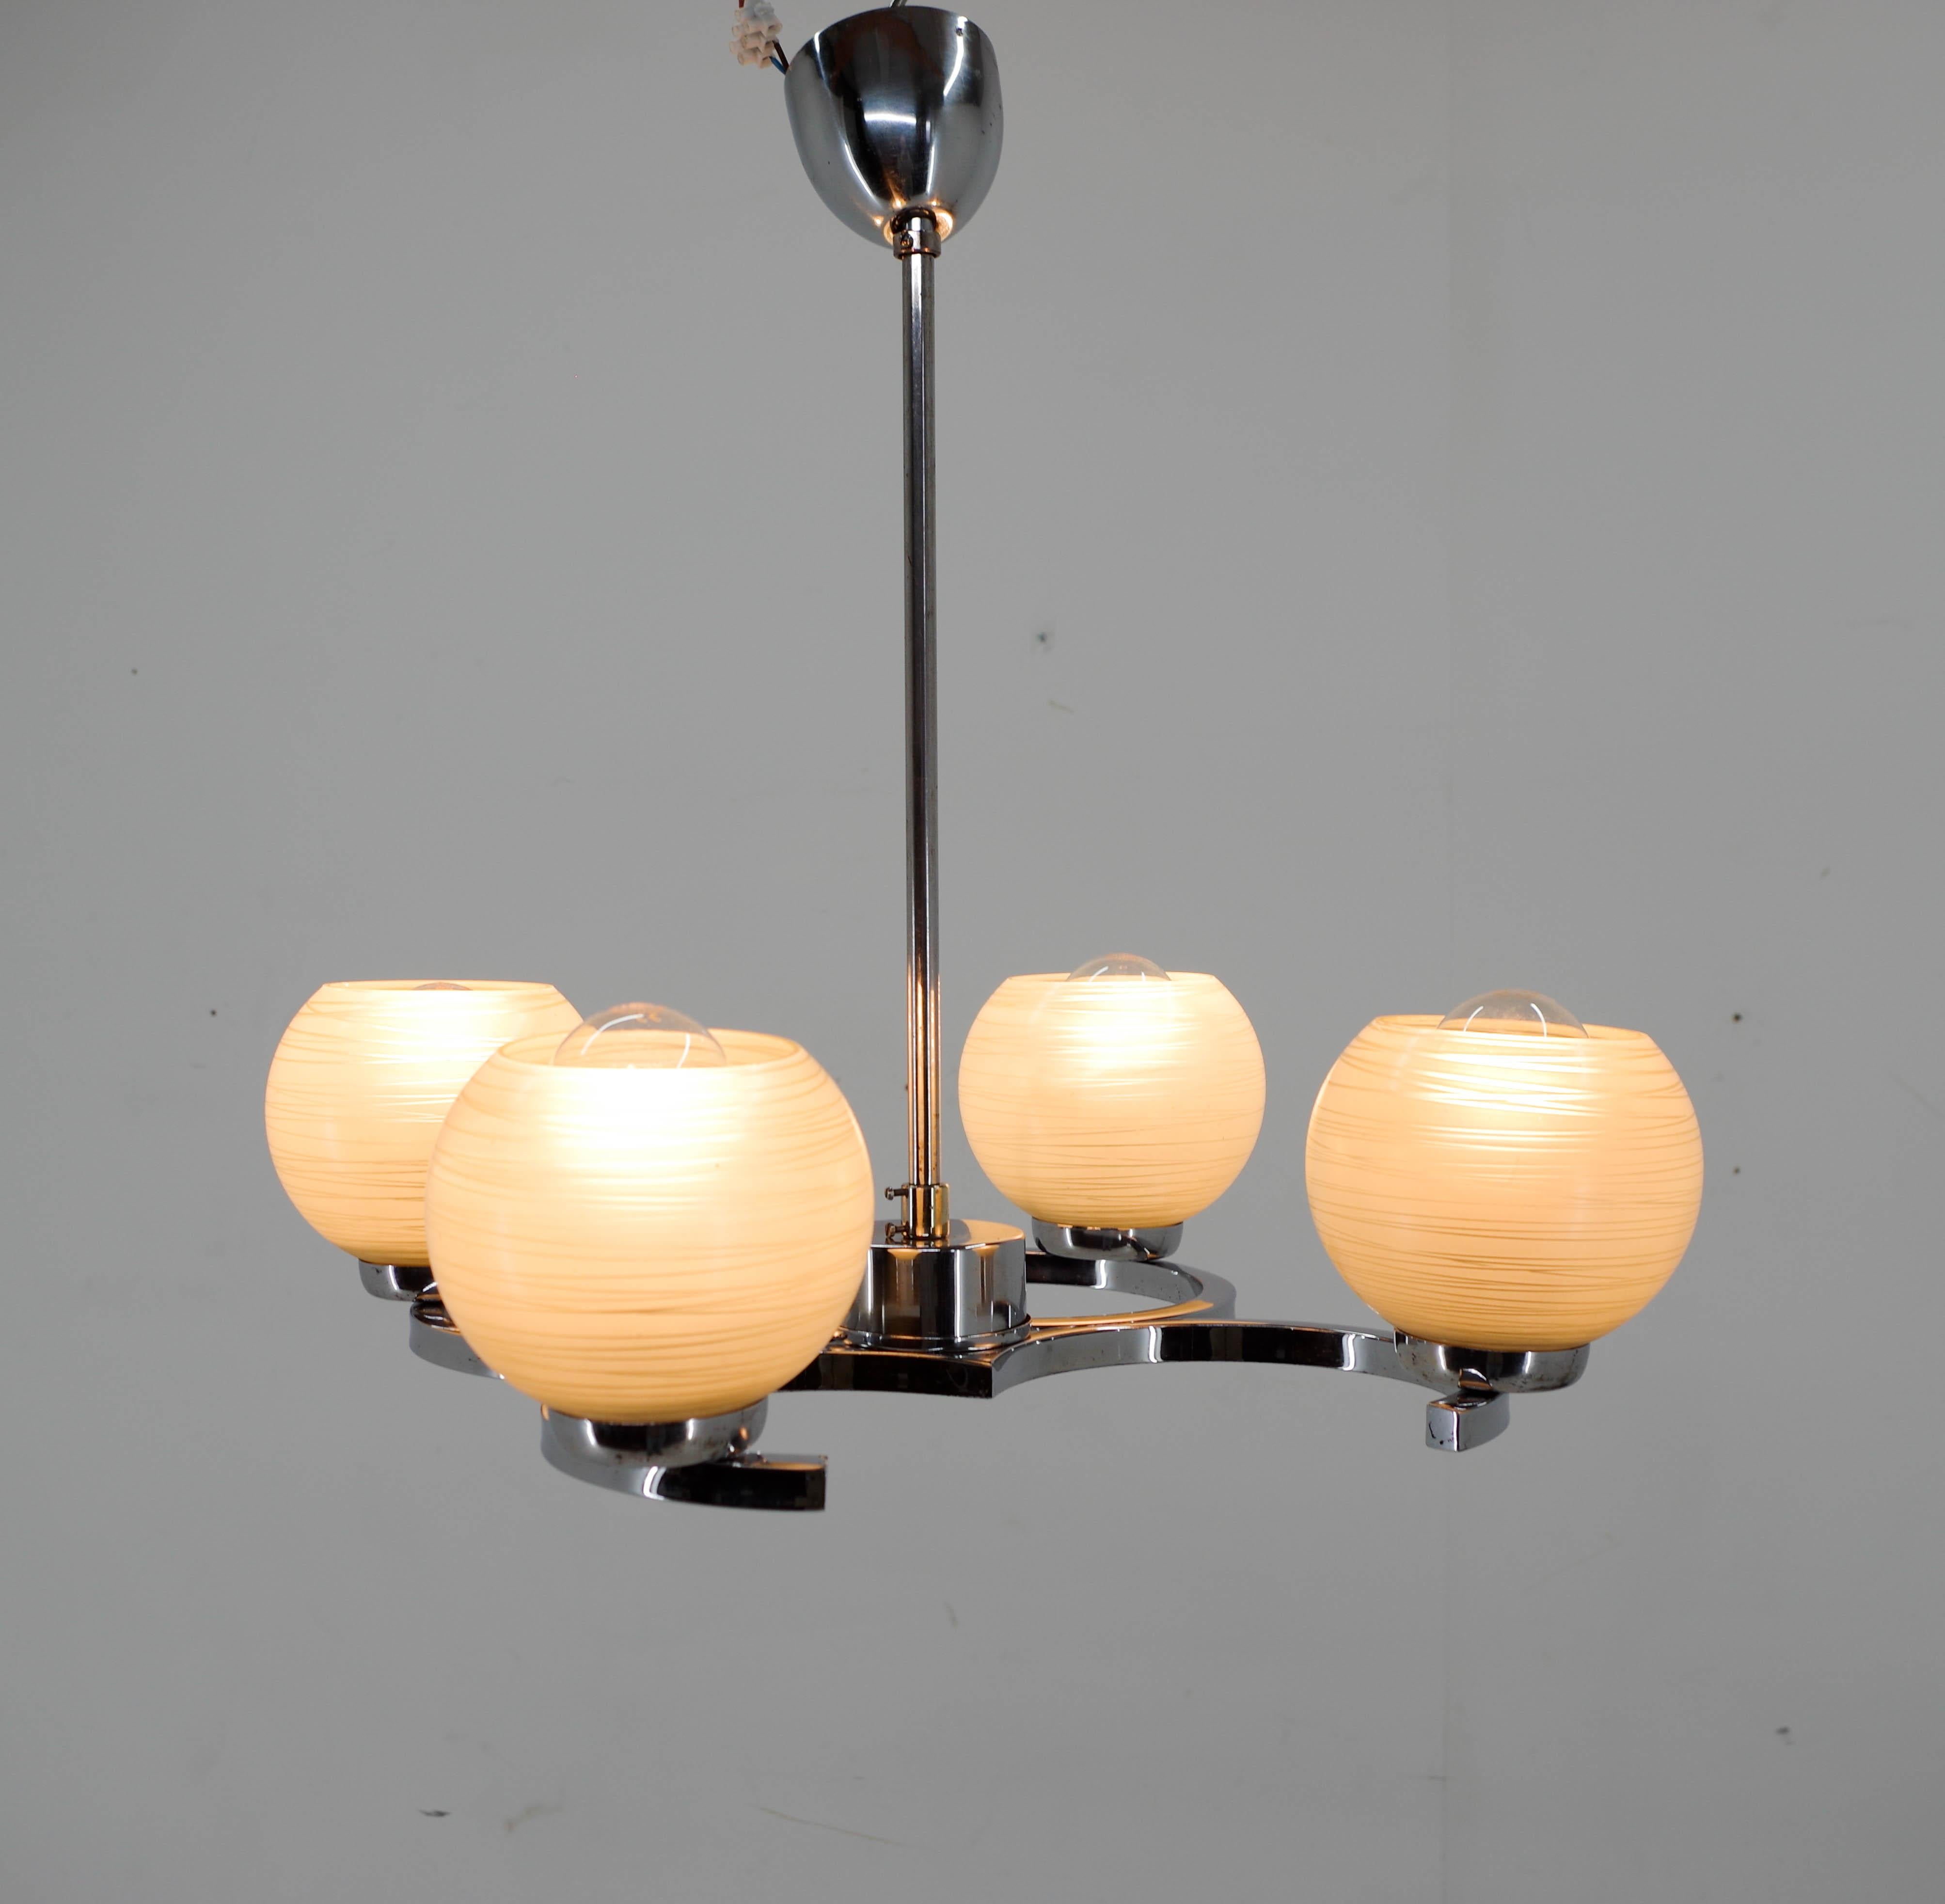 4-flamming chandelier made by Napako in Czechoslovakia in 1950s.
Glass in perfect condition, chrome with minor age patina.
Cleaned, polished, rewired: 4x40W, E25-E27 bulbs
US wiring compatible